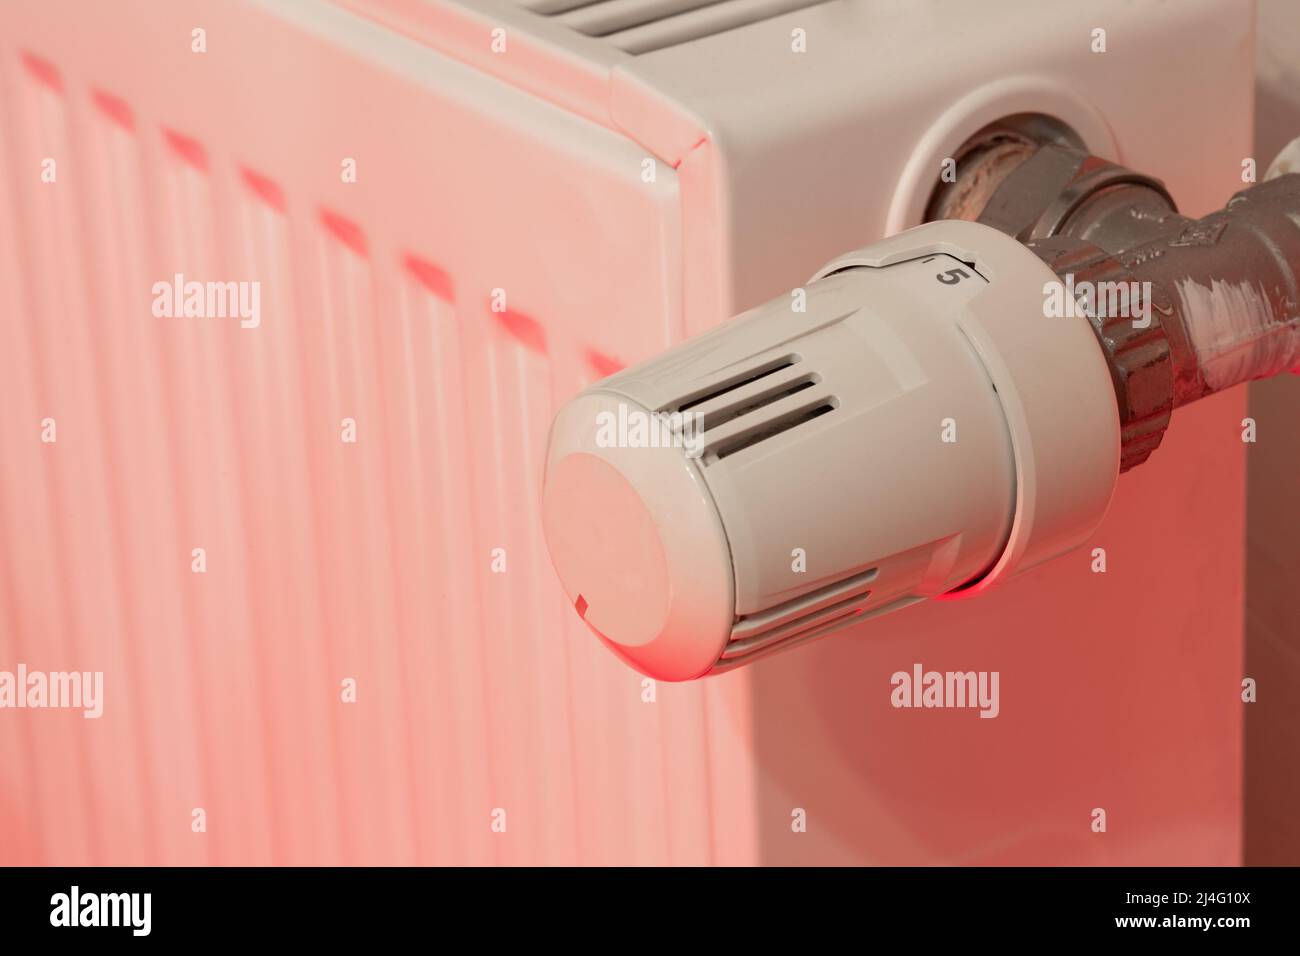 Water heating economy concept - radiator thermostat with red